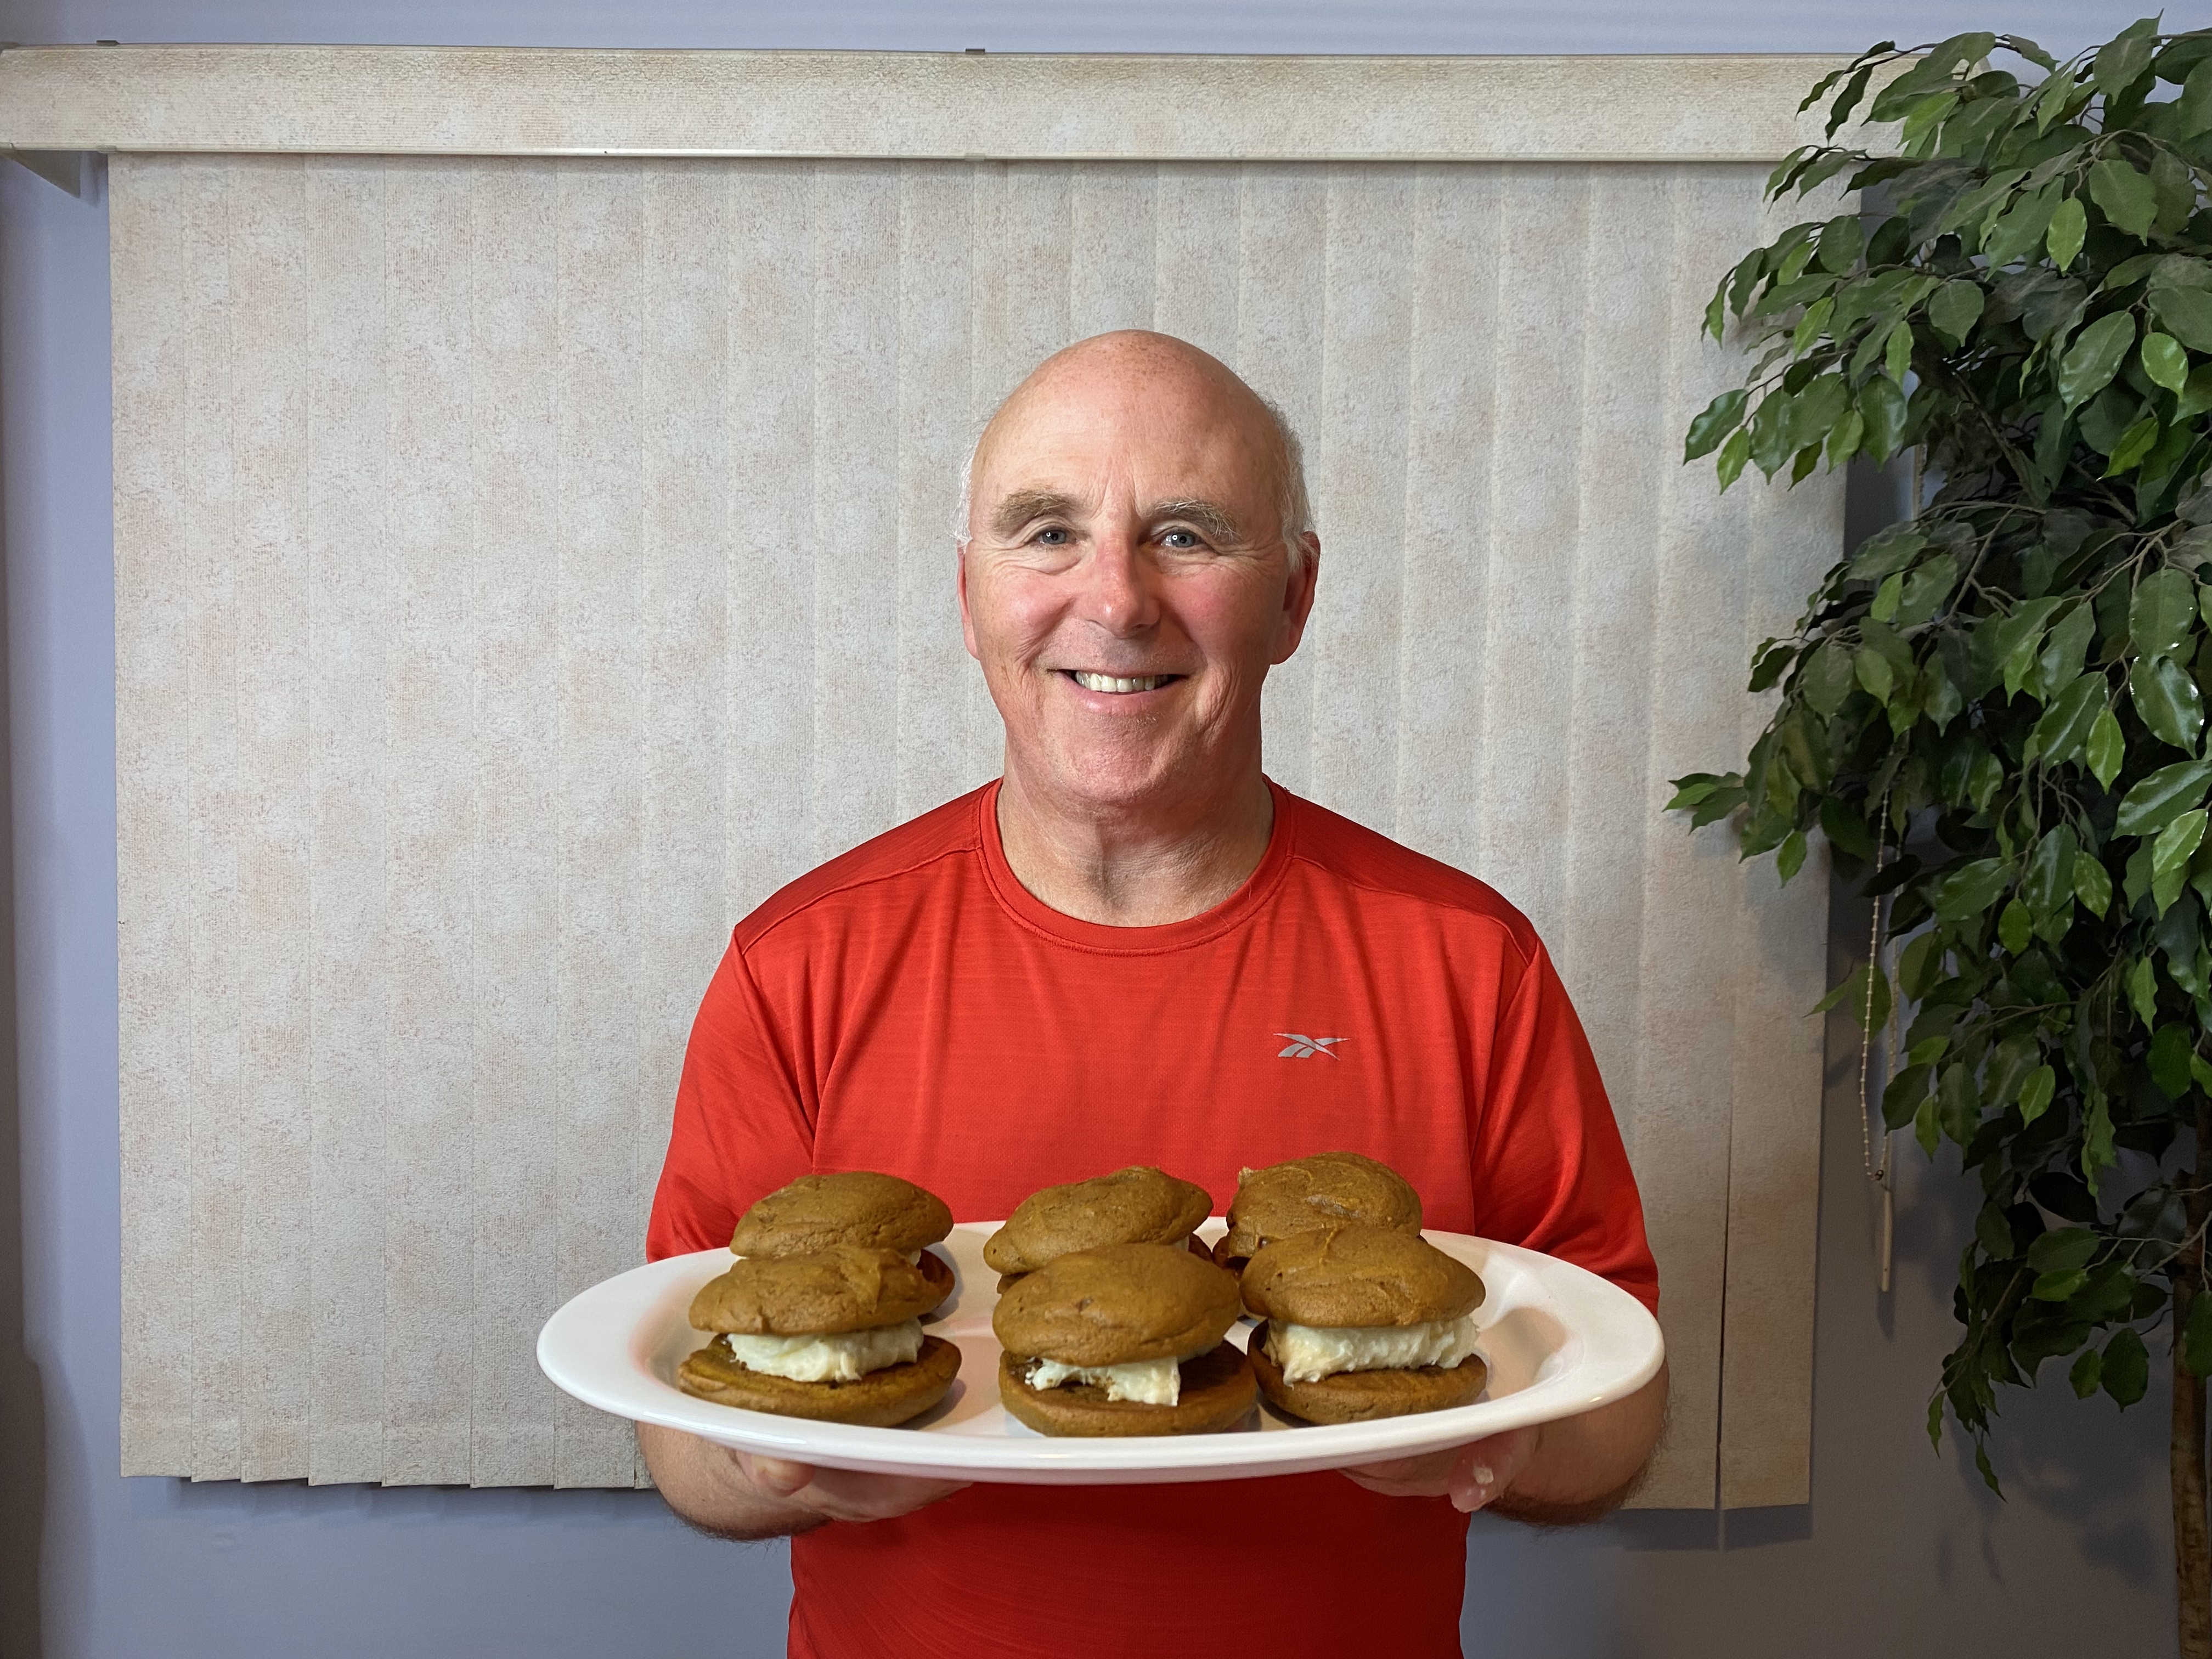 Chef Rob Scott holding a plate of whoopie pie desserts